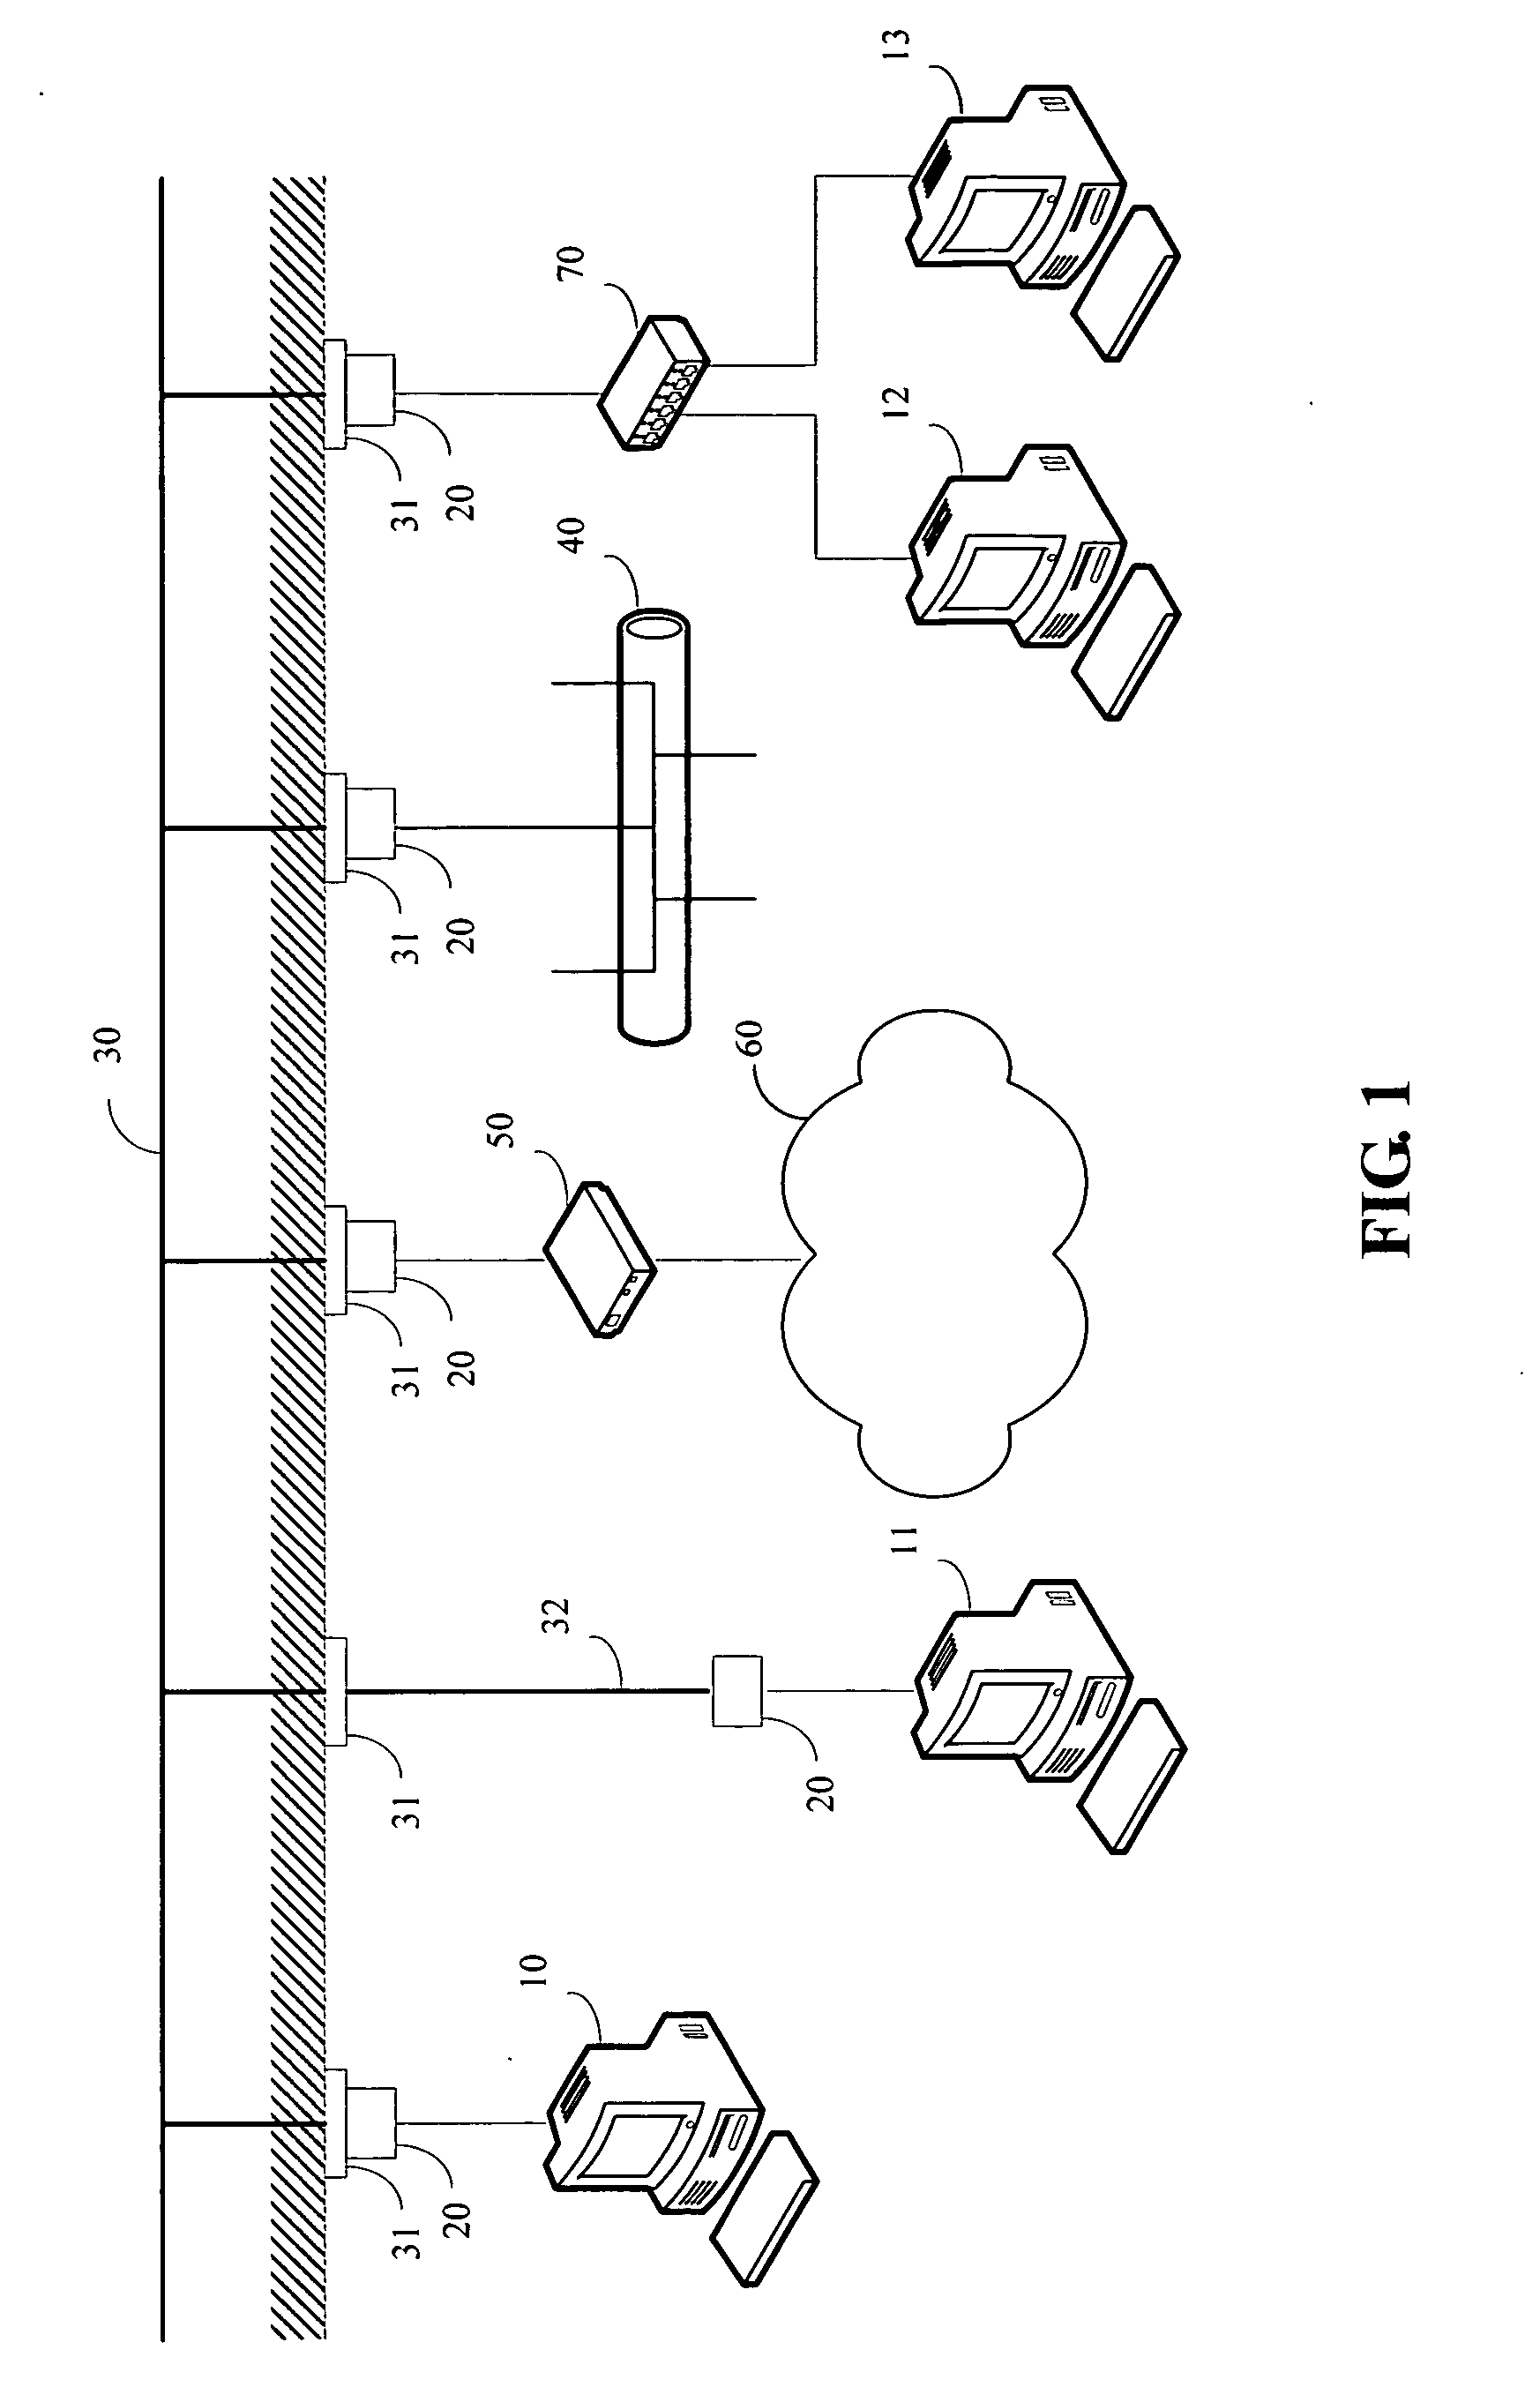 Power extension apparatus having local area network switching function